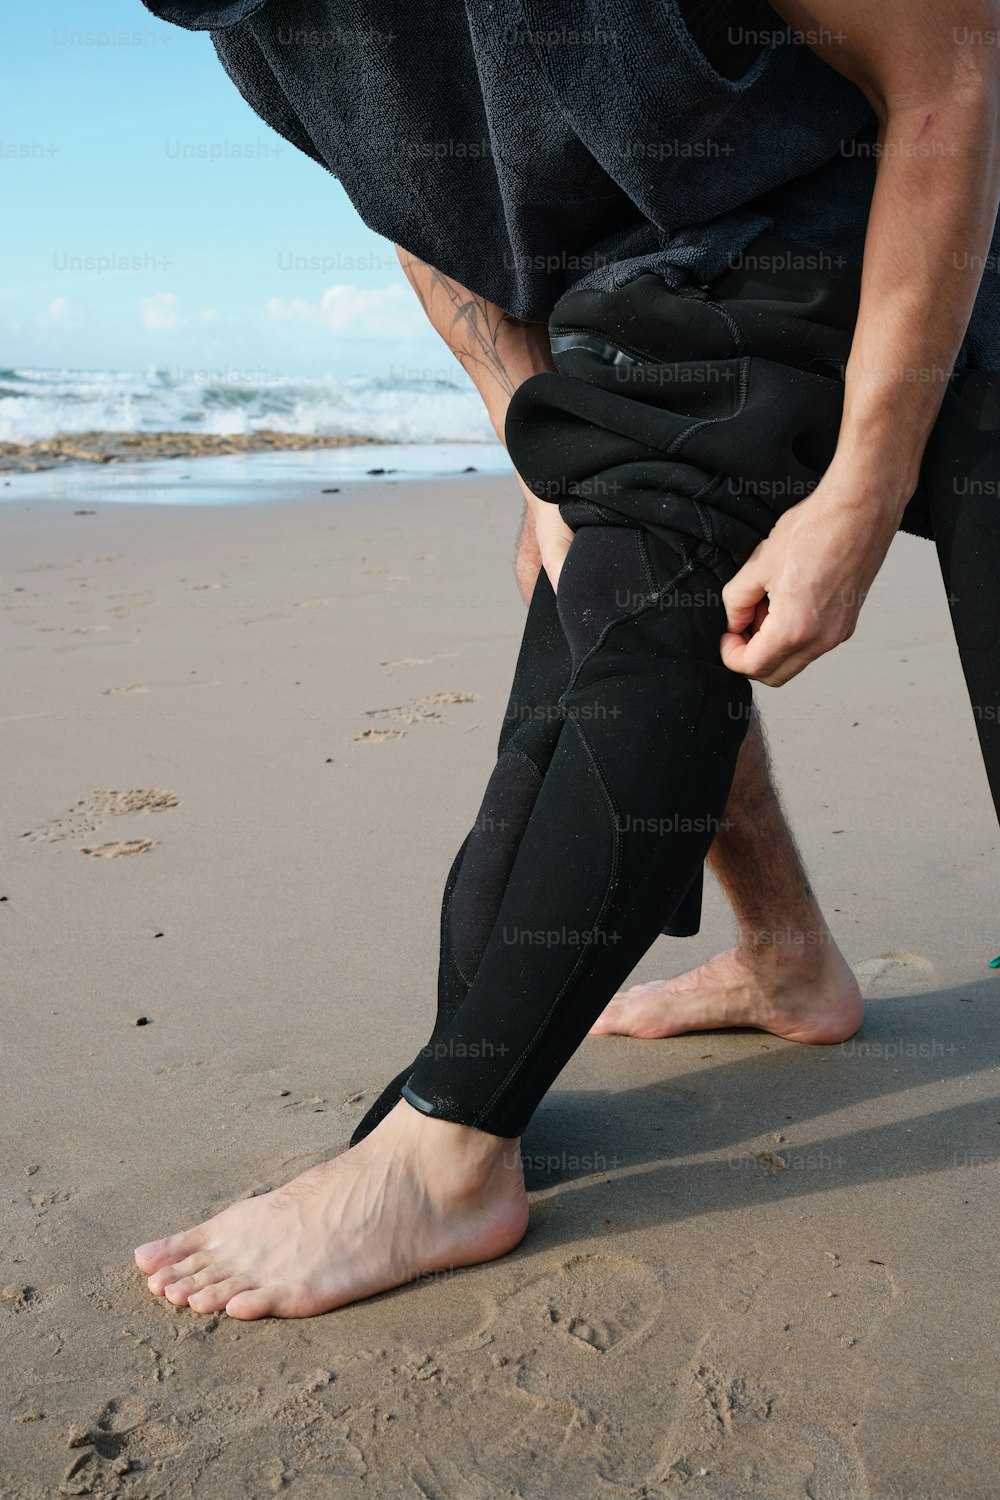 a man in a wet suit is standing on the beach